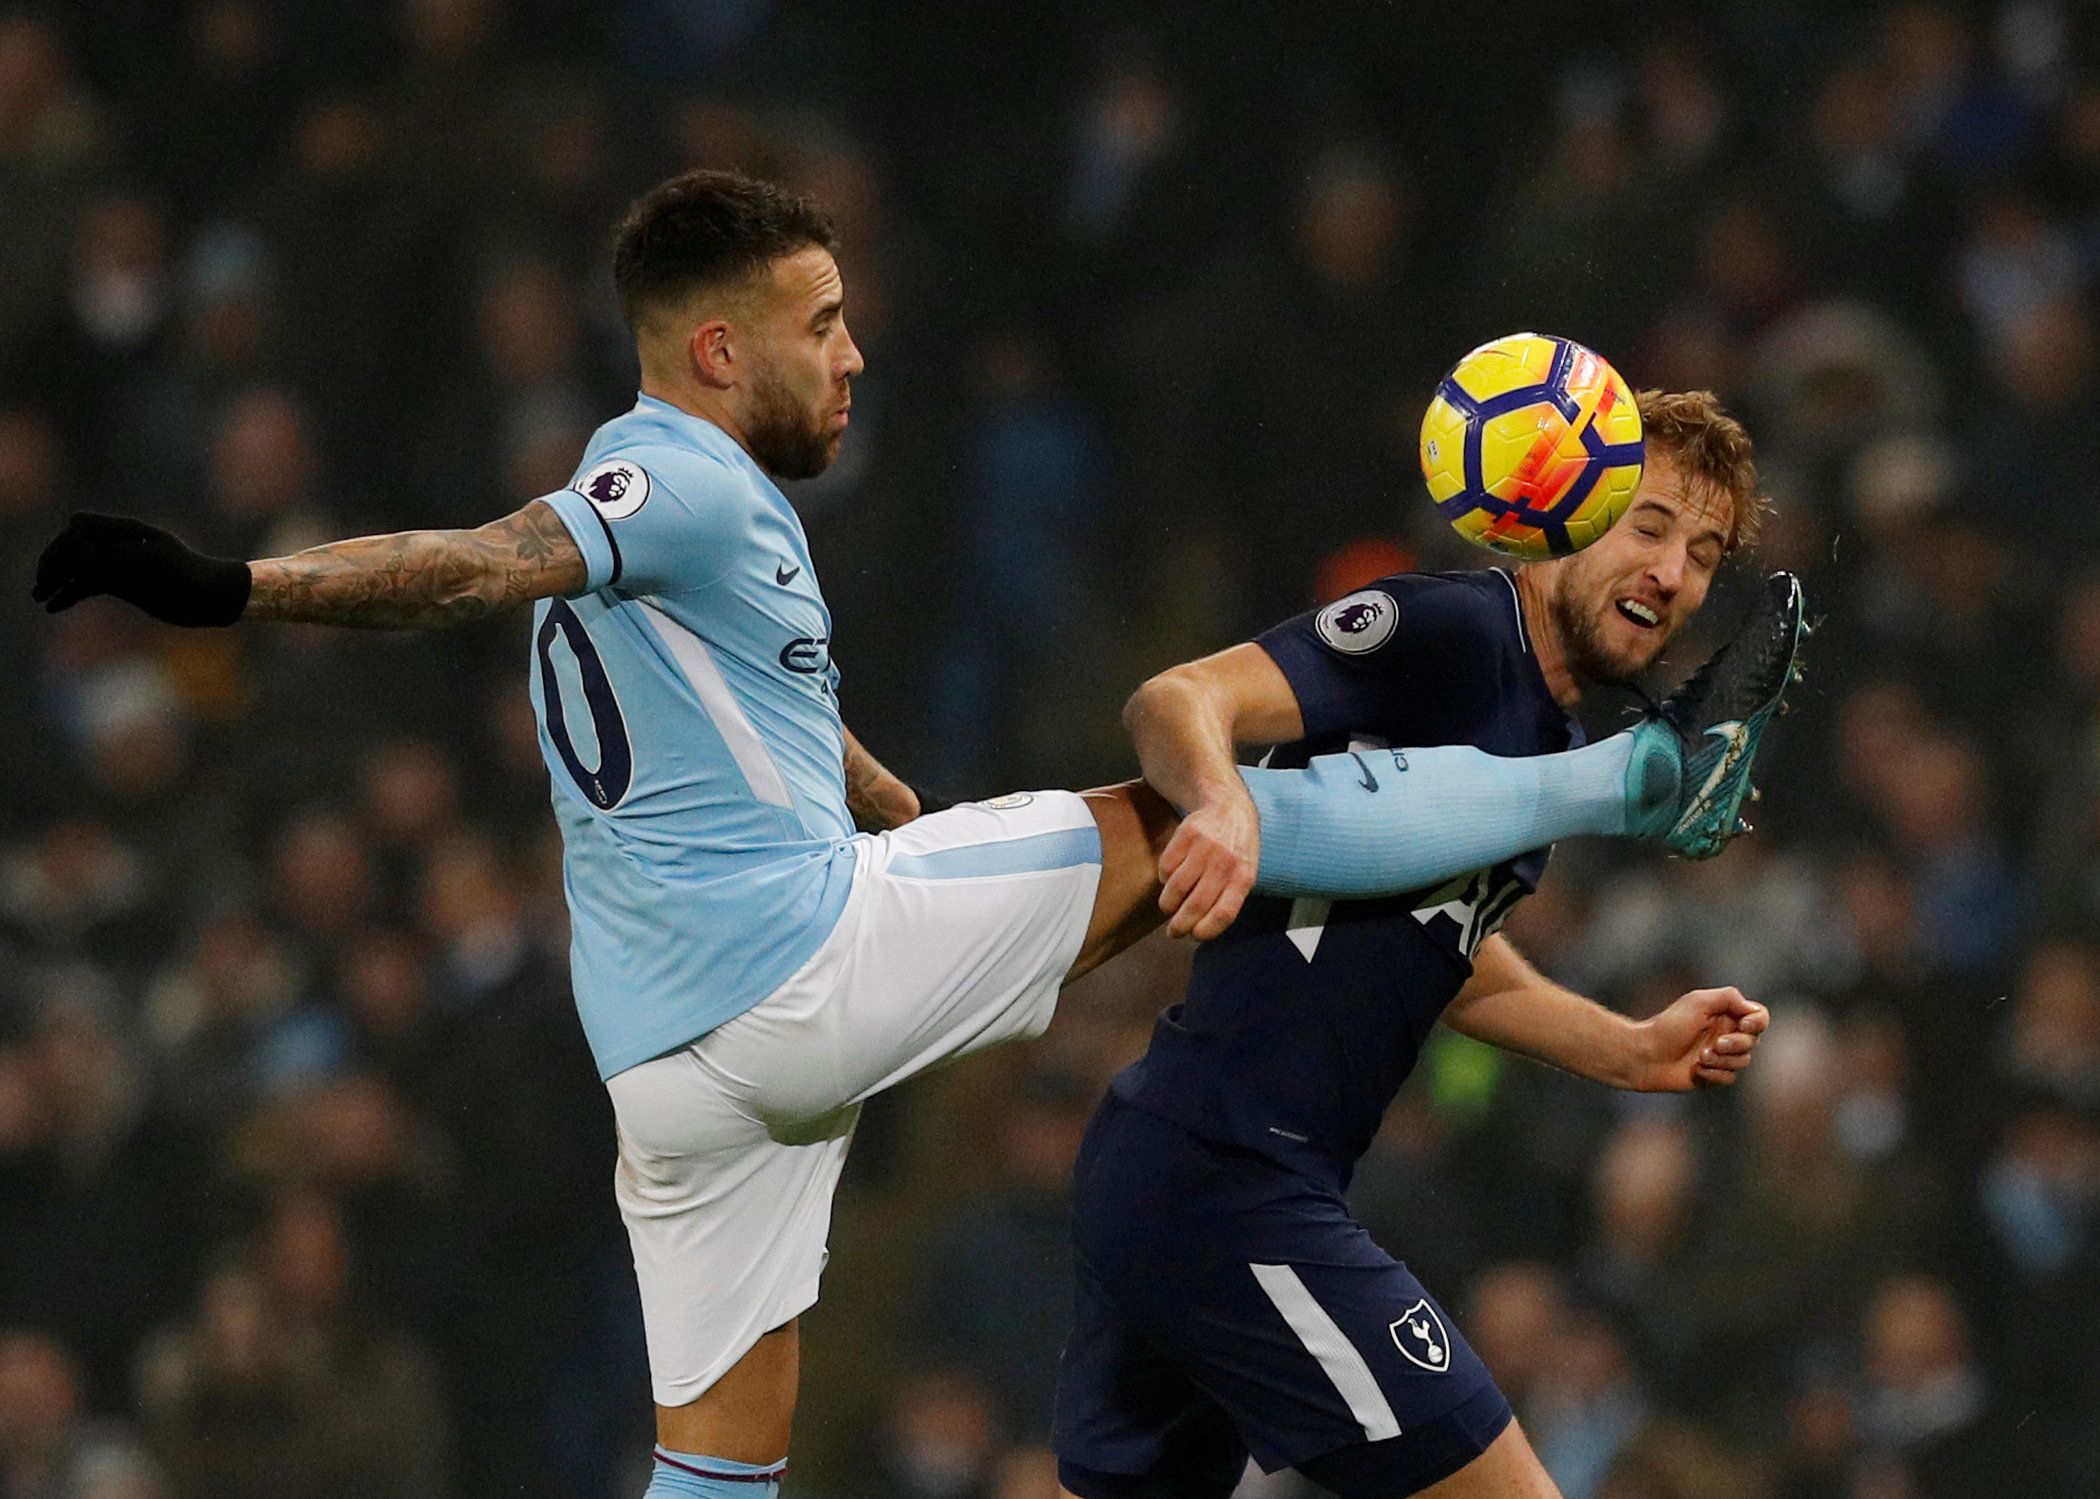 Soccer Football - Premier League - Manchester City vs Tottenham Hotspur - Etihad Stadium, Manchester, Britain - December 16, 2017   Manchester City's Nicolas Otamendi in action with Tottenham's Harry Kane    REUTERS/Phil Noble    EDITORIAL USE ONLY. No use with unauthorized audio, video, data, fixture lists, club/league logos or 